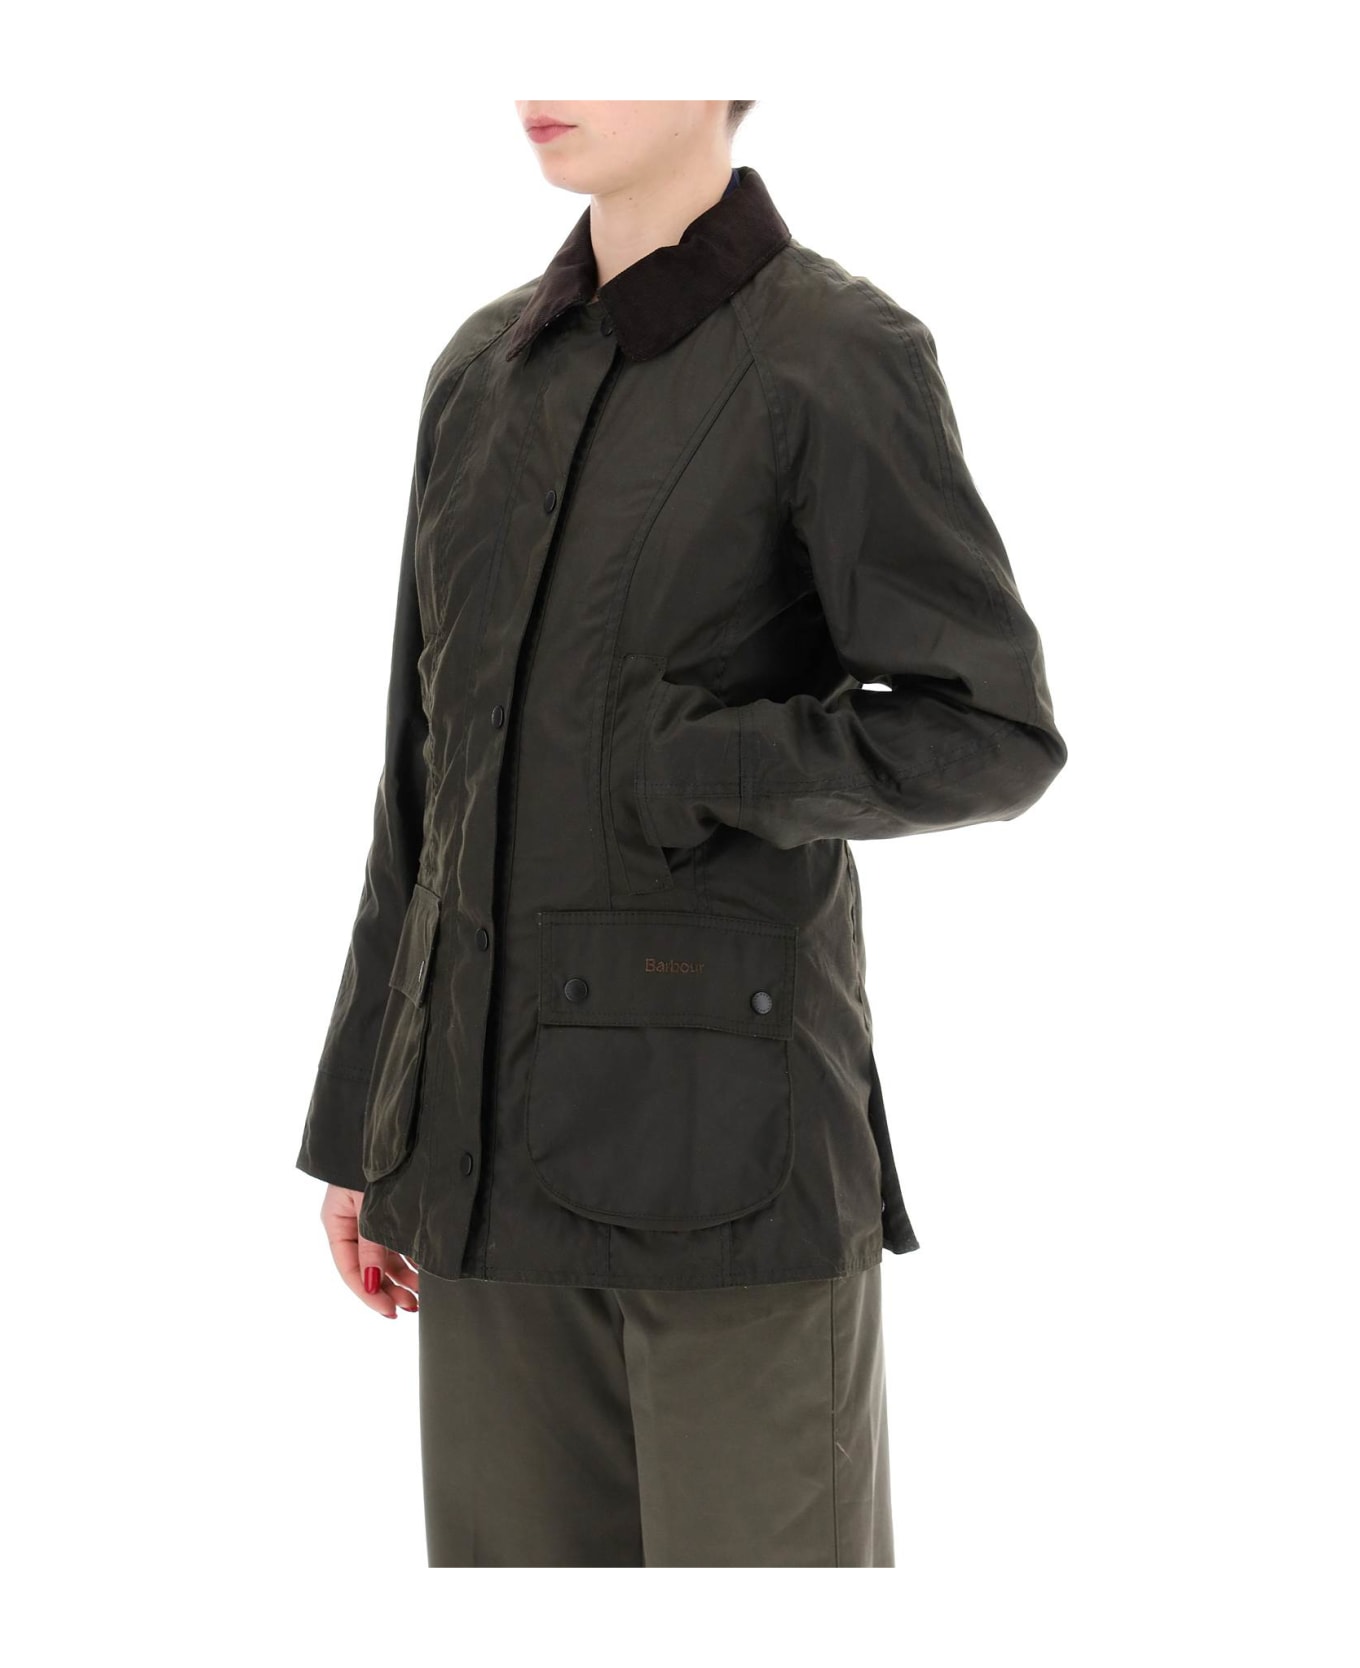 Barbour Beadnell Wax Jacket - OLIVE (Brown)